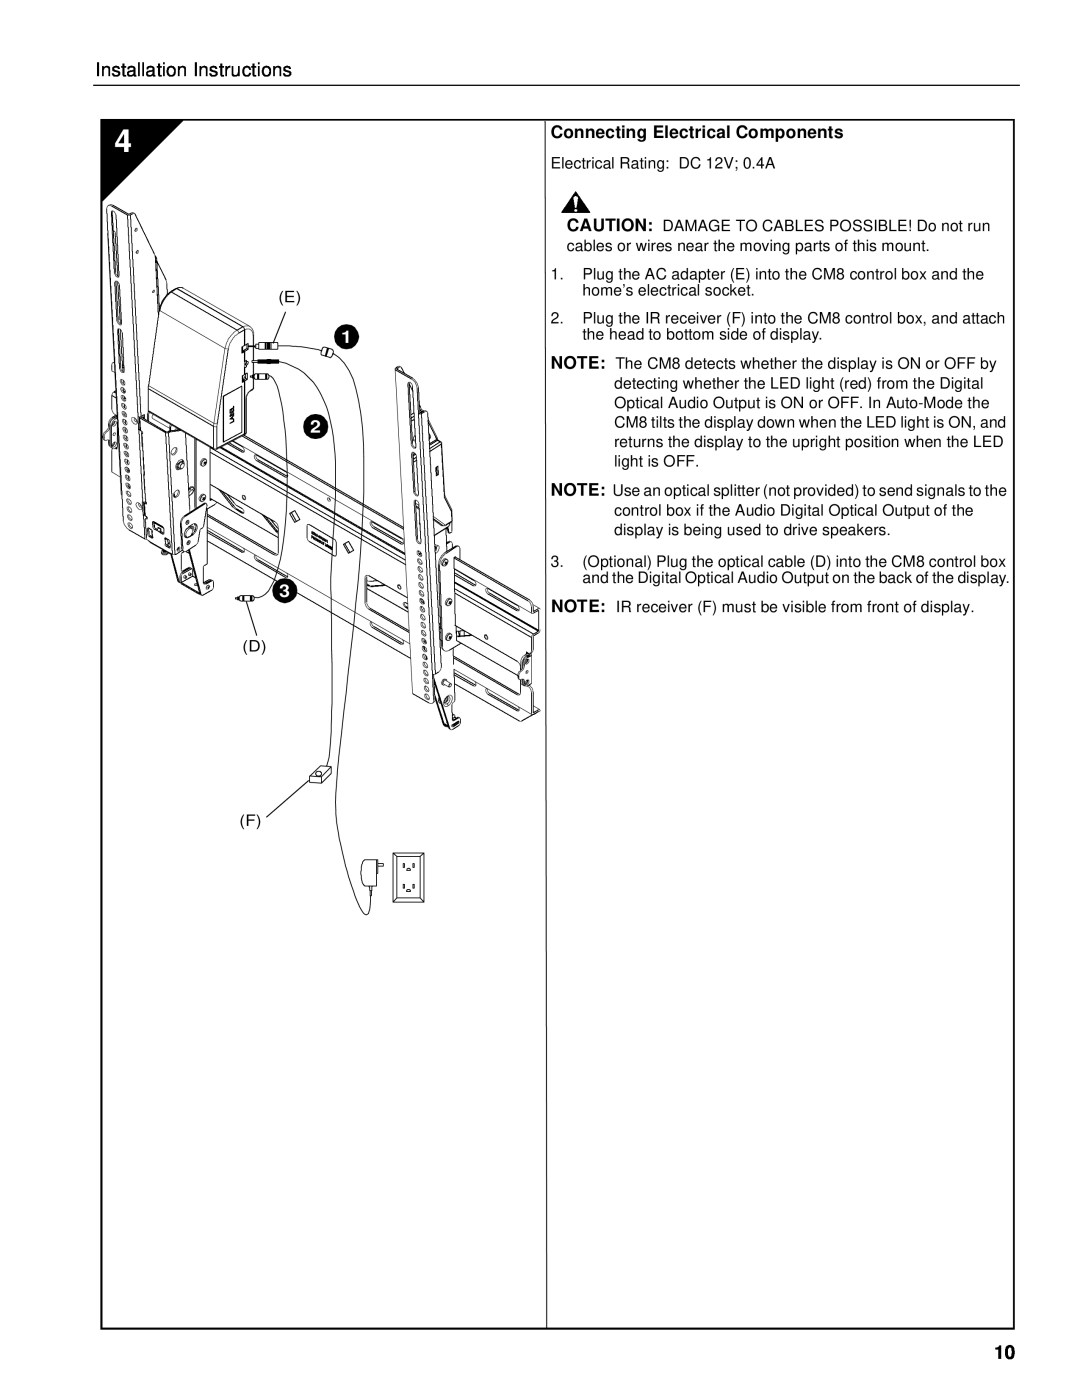 Chief Manufacturing CM8 installation instructions Connecting Electrical Components, Installation Instructions 